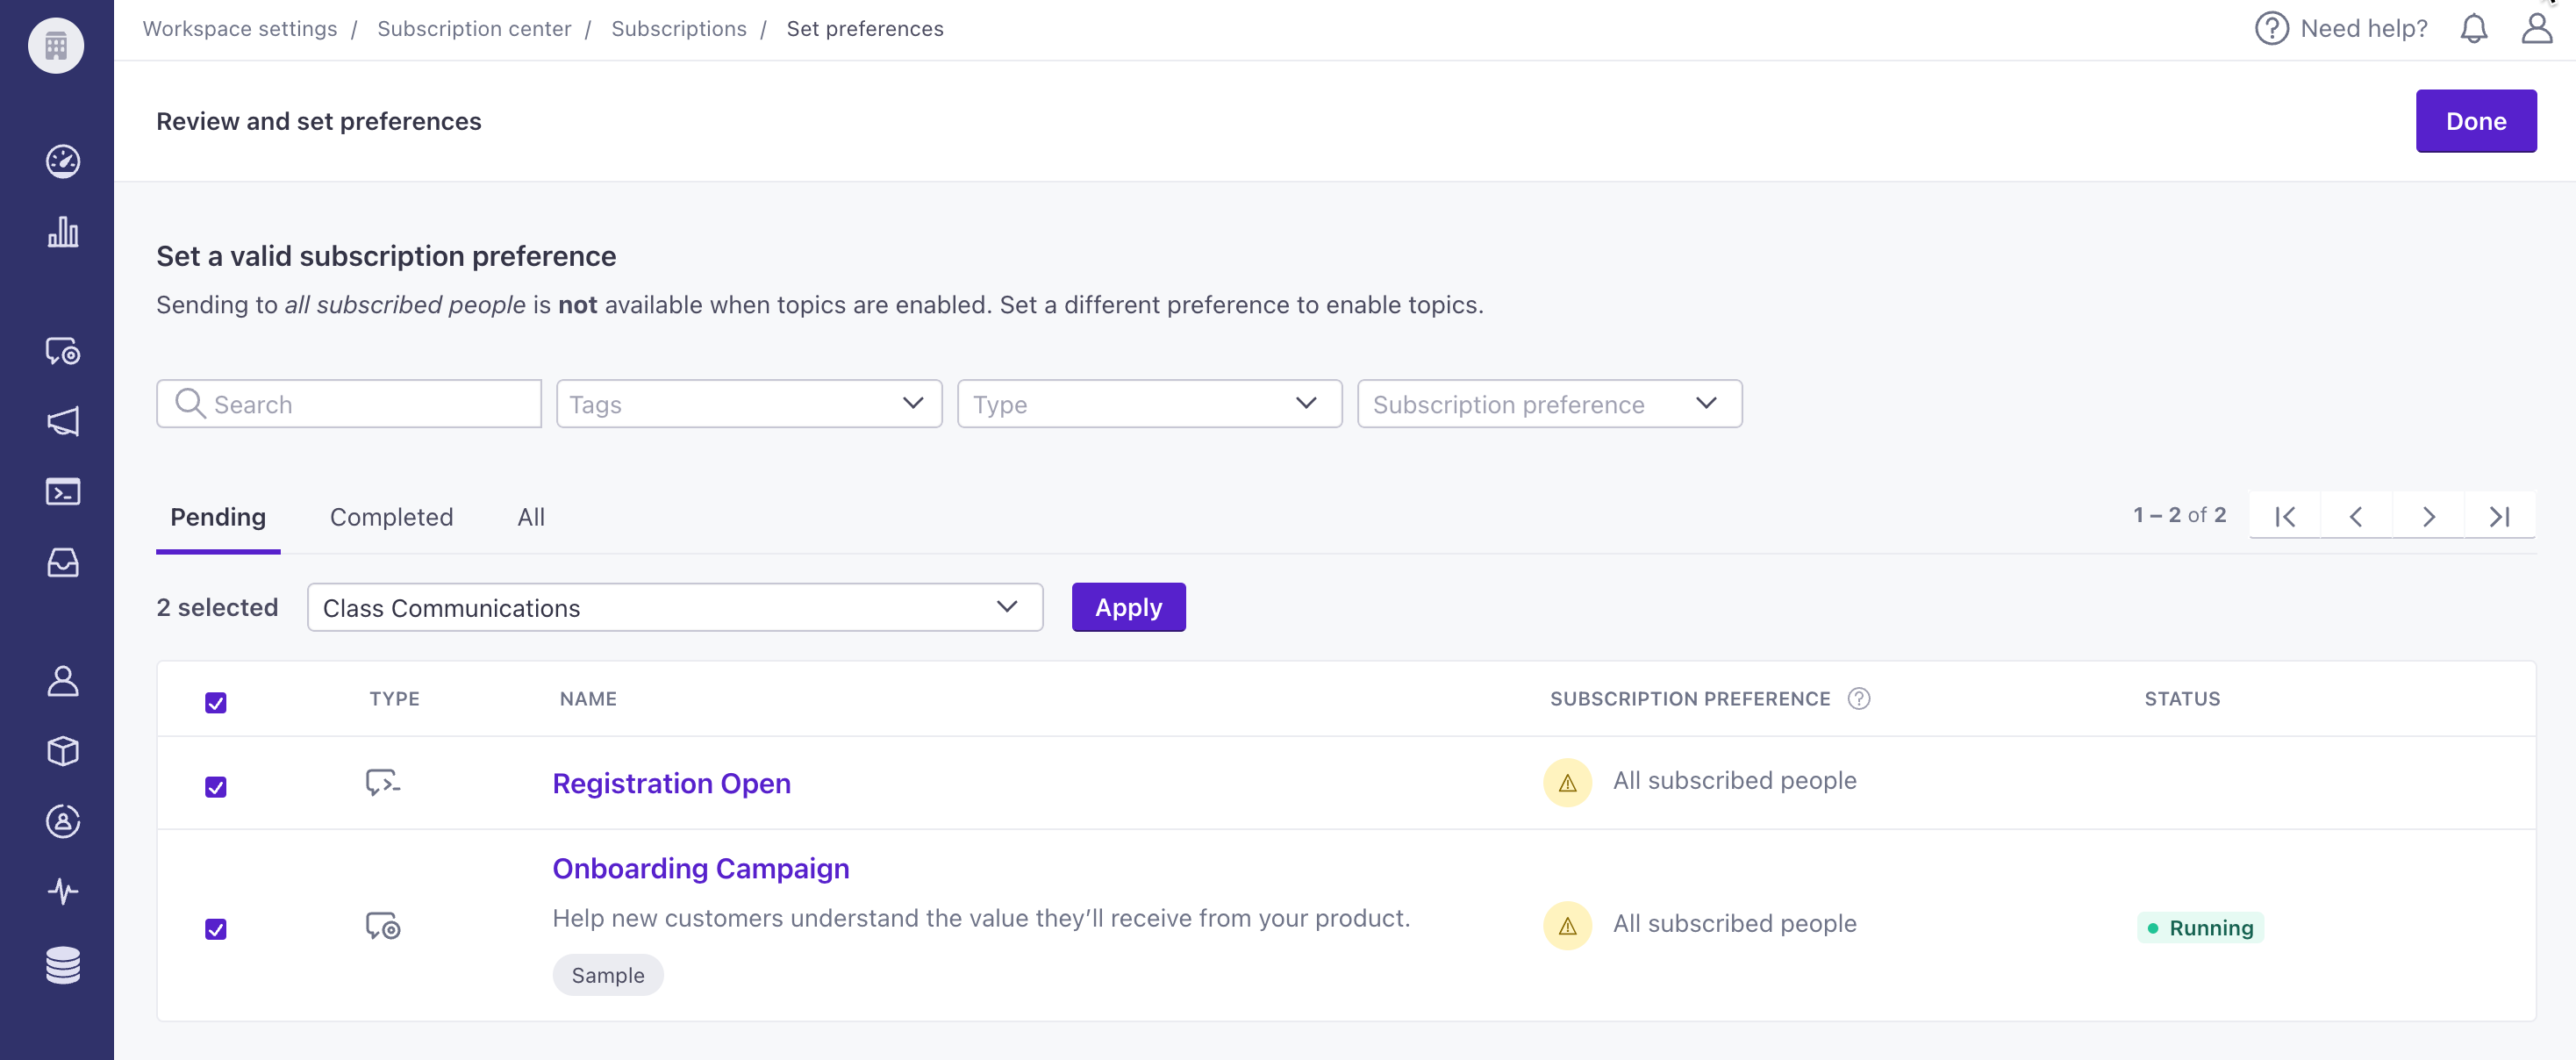 Assign subscription topics in bulk to live campaigns and broadcasts